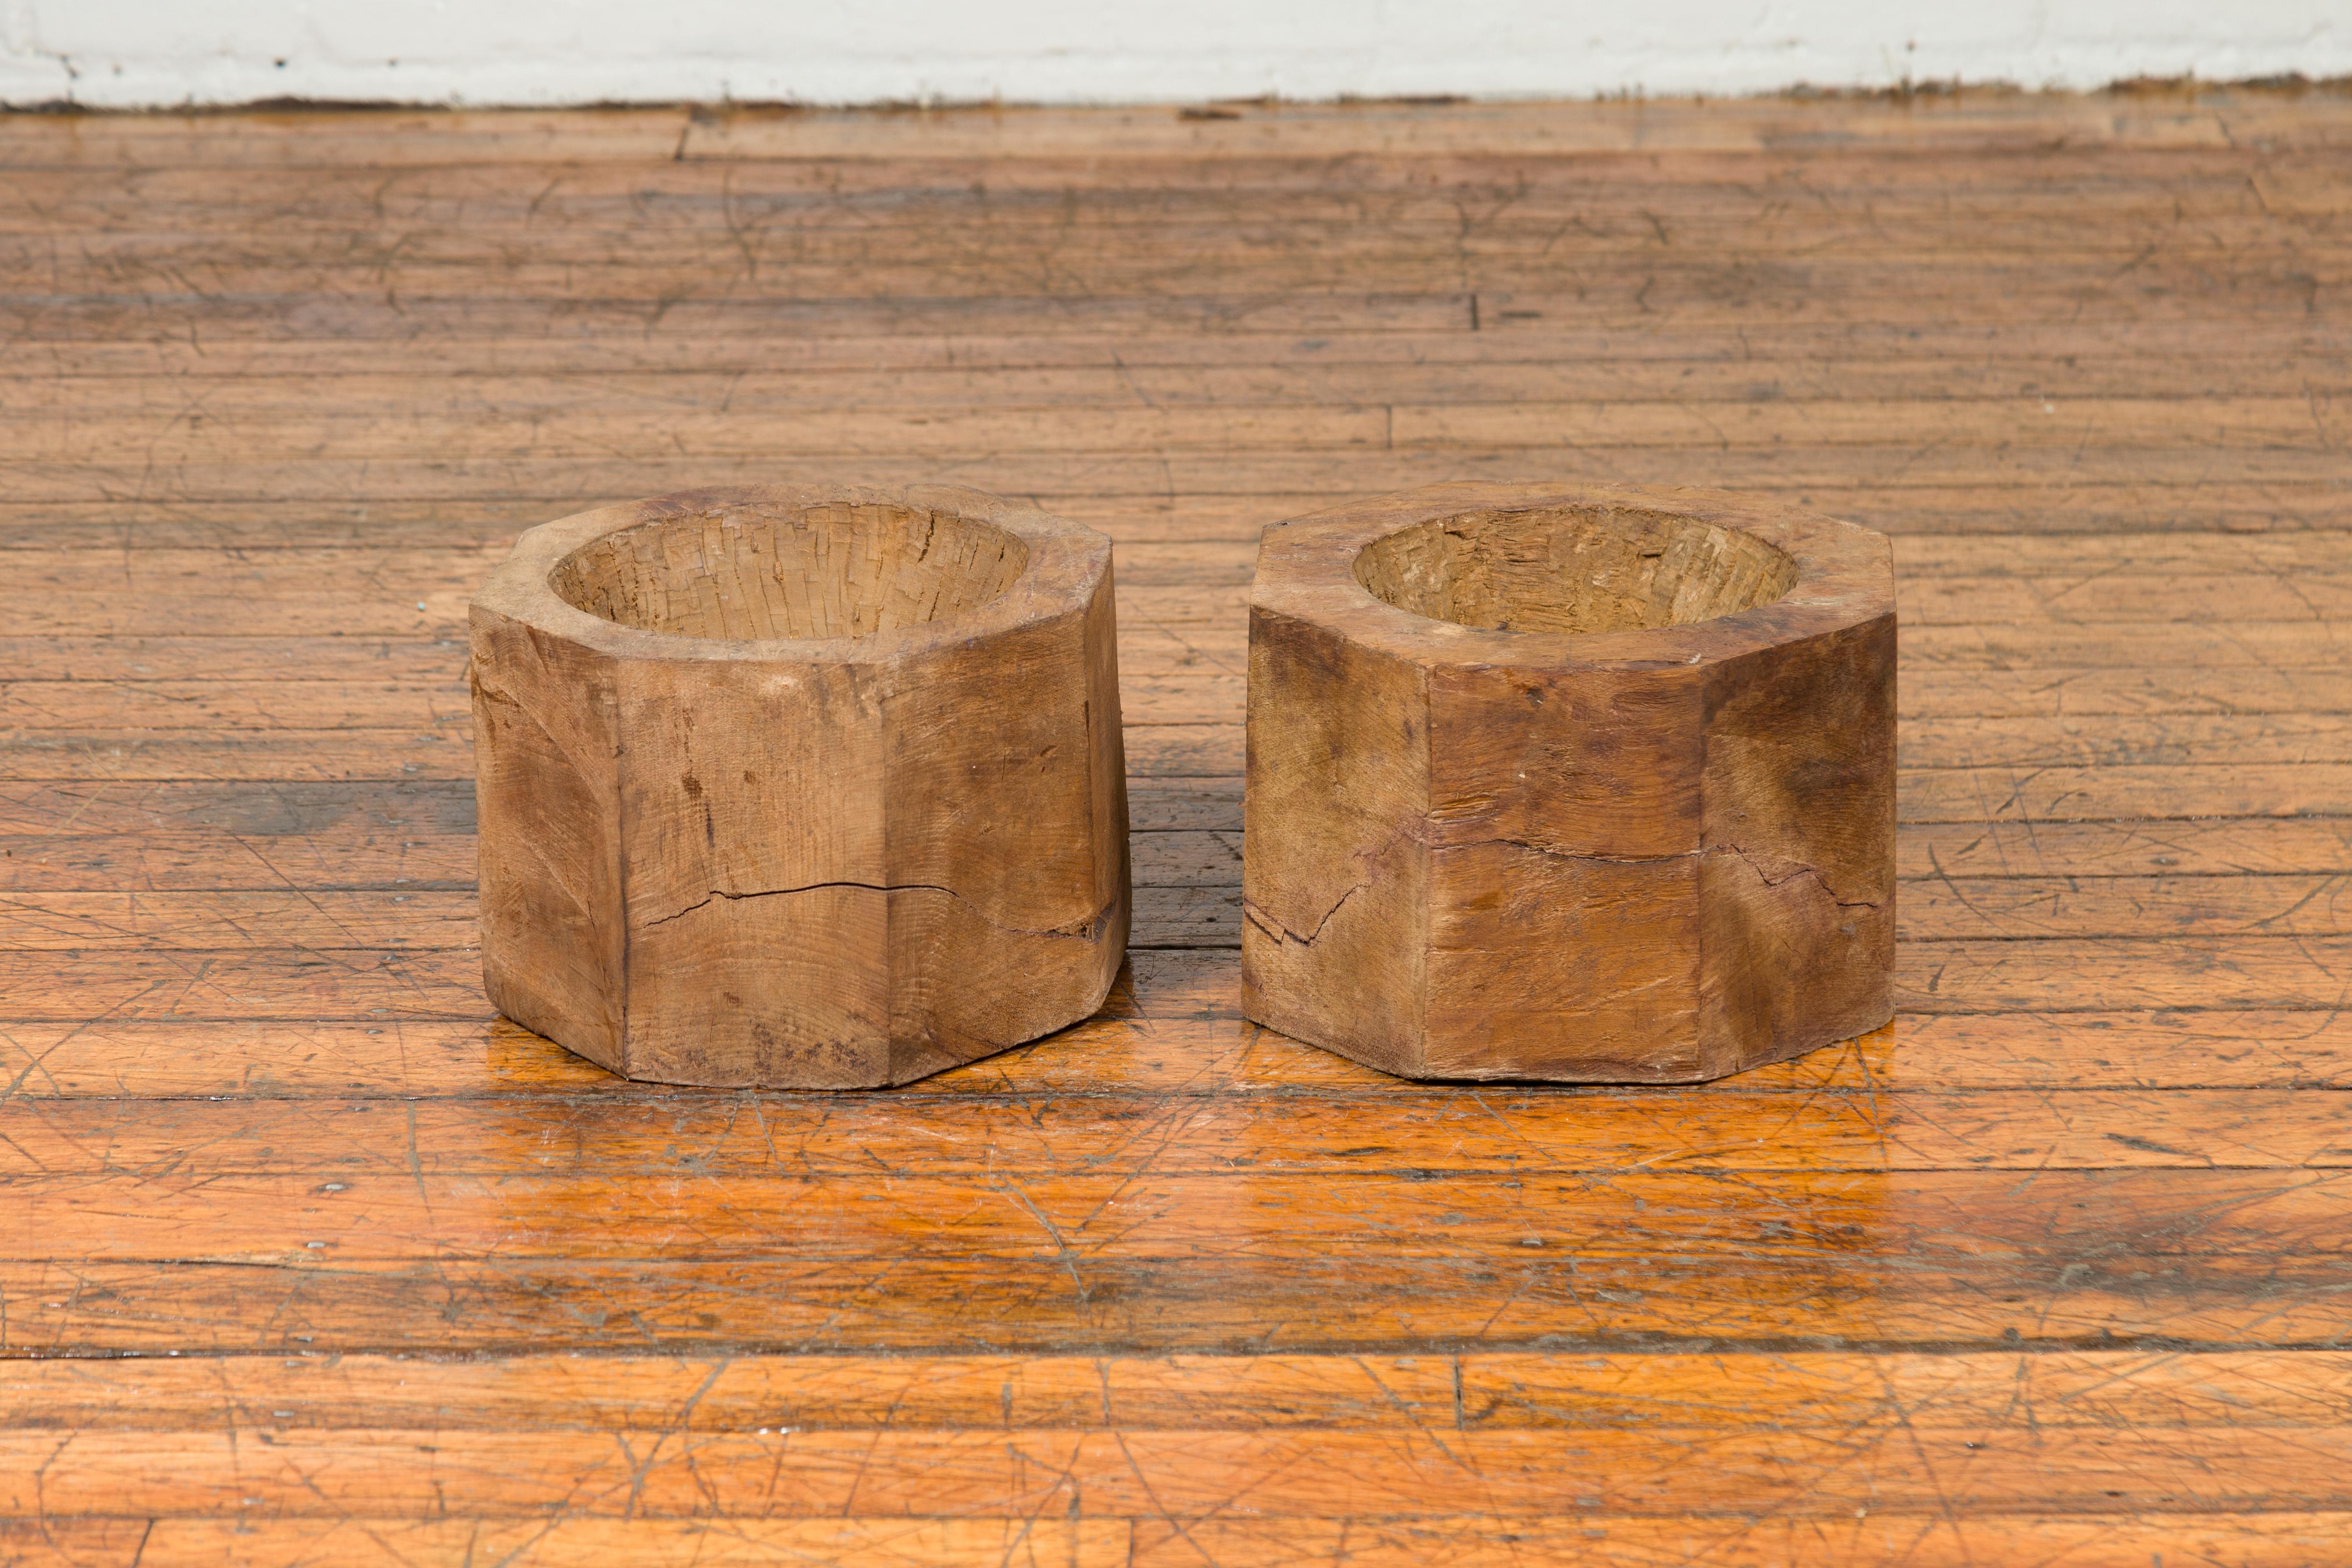 An antique Indonesian rustic octagonal wooden planter made from a tree trunk, two available, priced and sold individually. They are $350 each. Charming our eyes with its nicely weathered appearance and simple lines, each planter is made of a tree